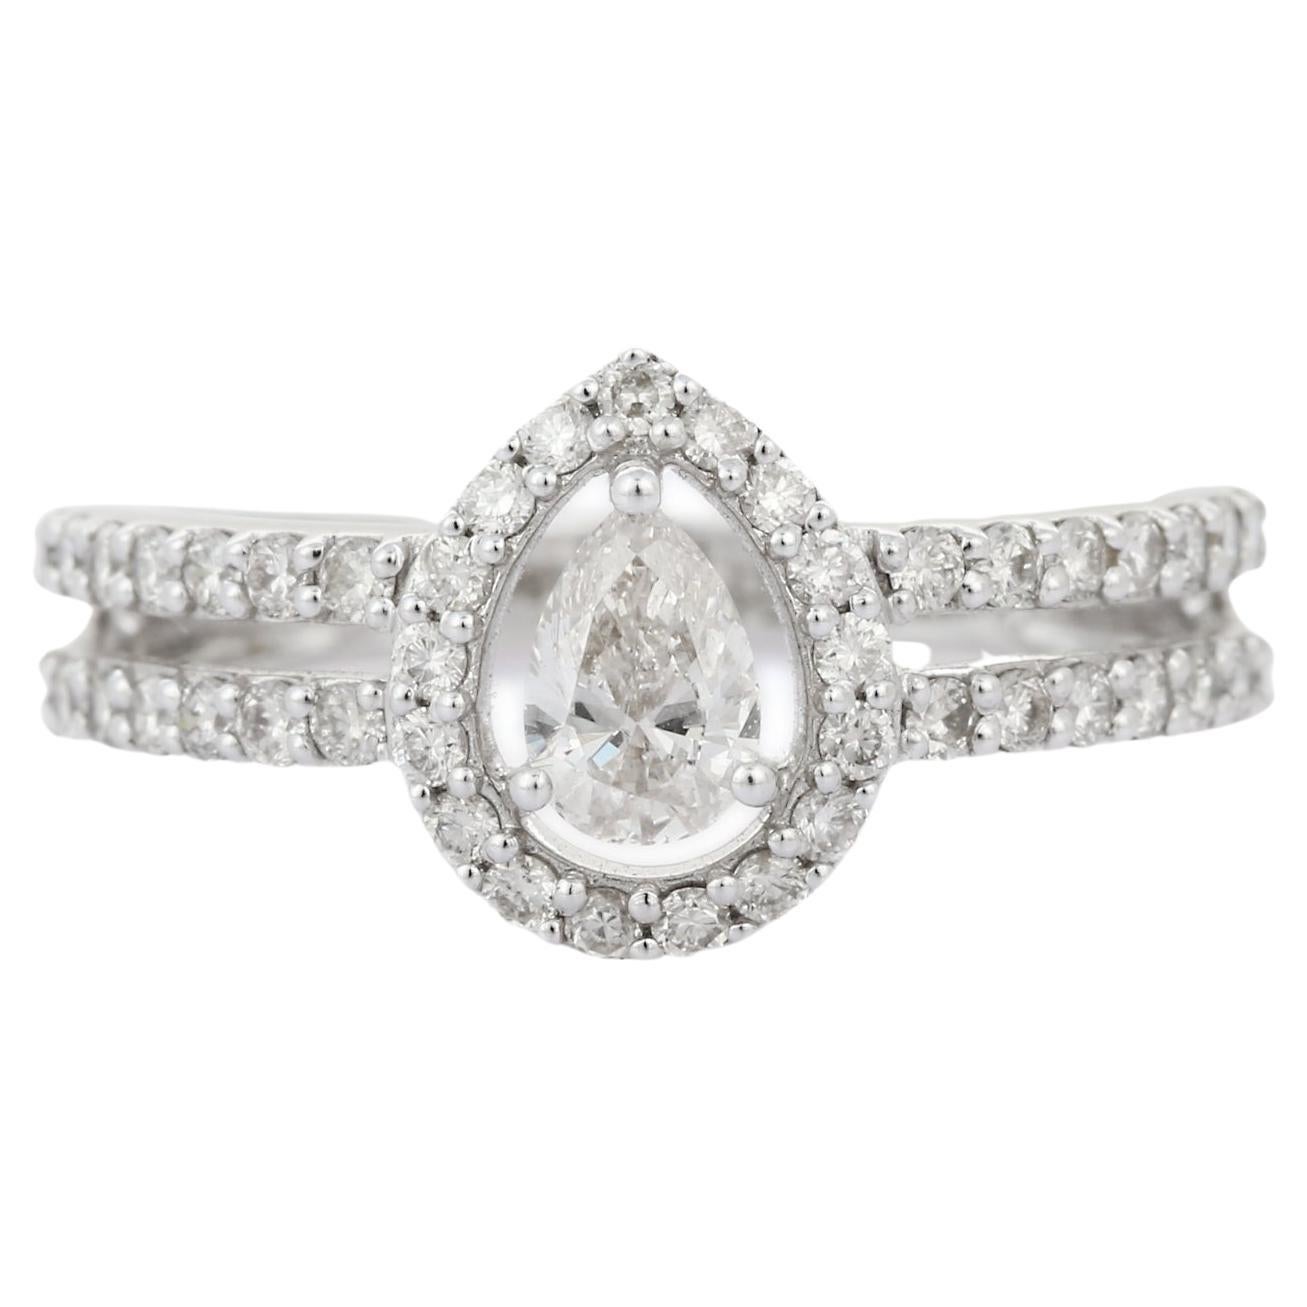 For Sale:  14K White Gold Pear Diamond Halo Engagement Ring